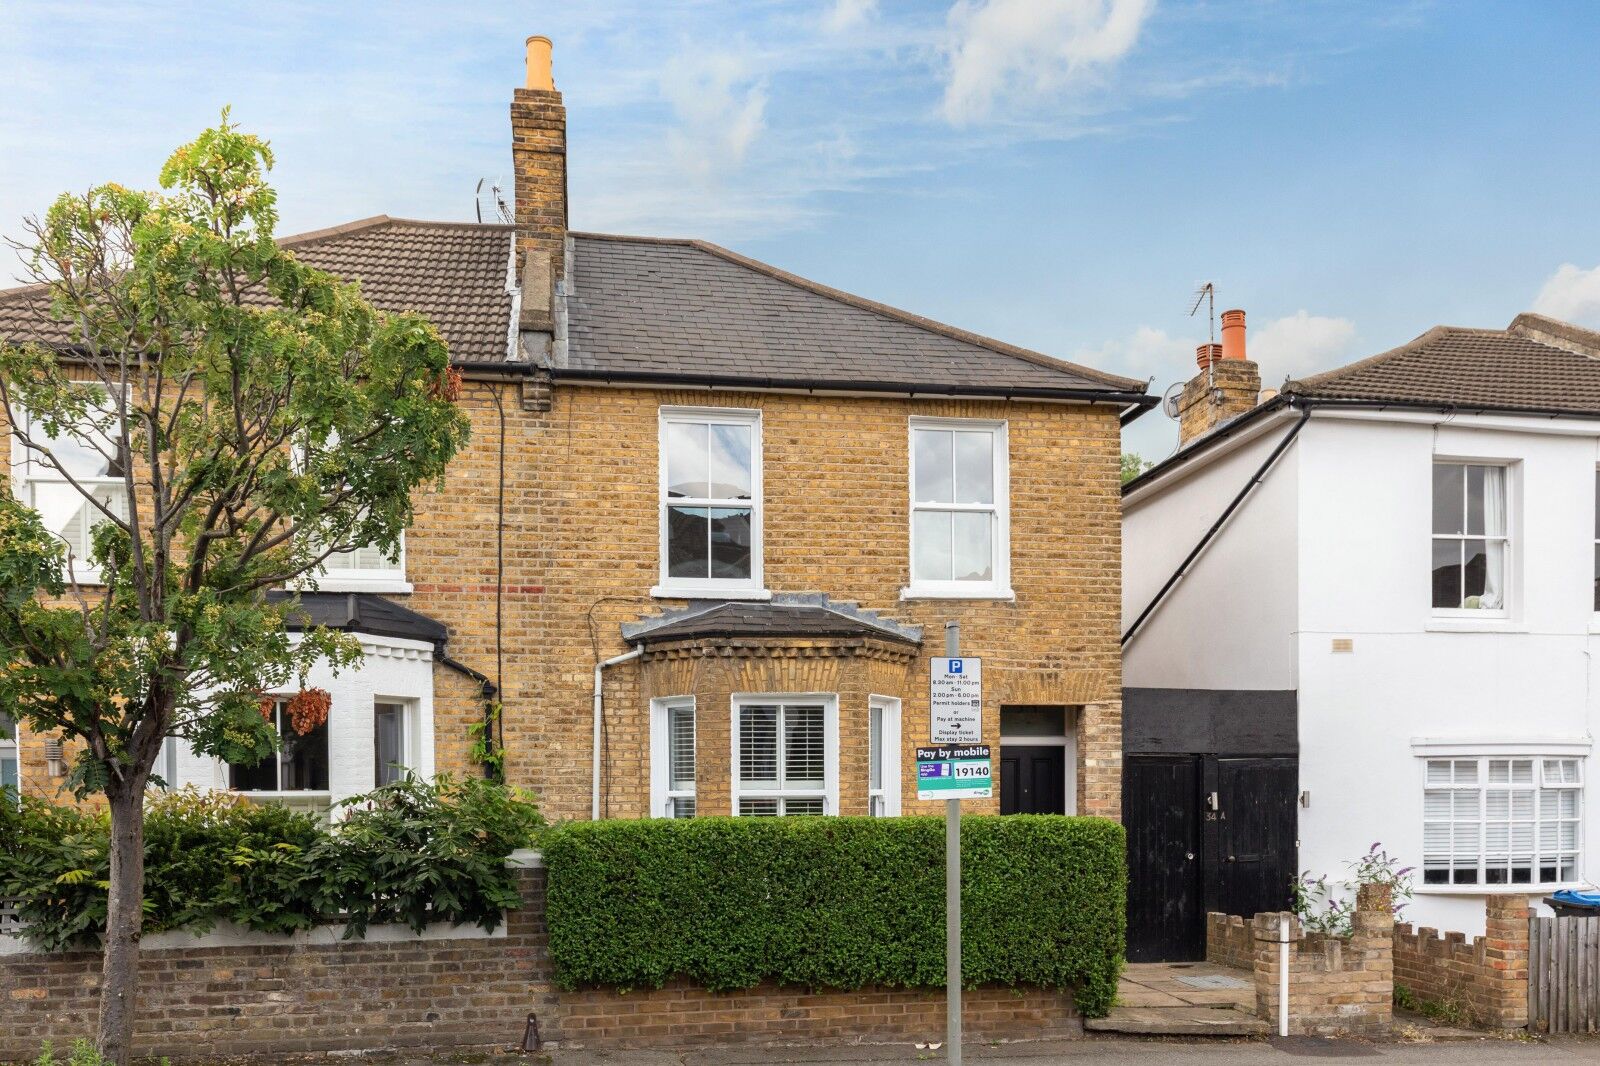 3 bedroom semi detached house to rent, Available from 22/06/2024 Gladstone Road, Wimbledon, SW19, main image